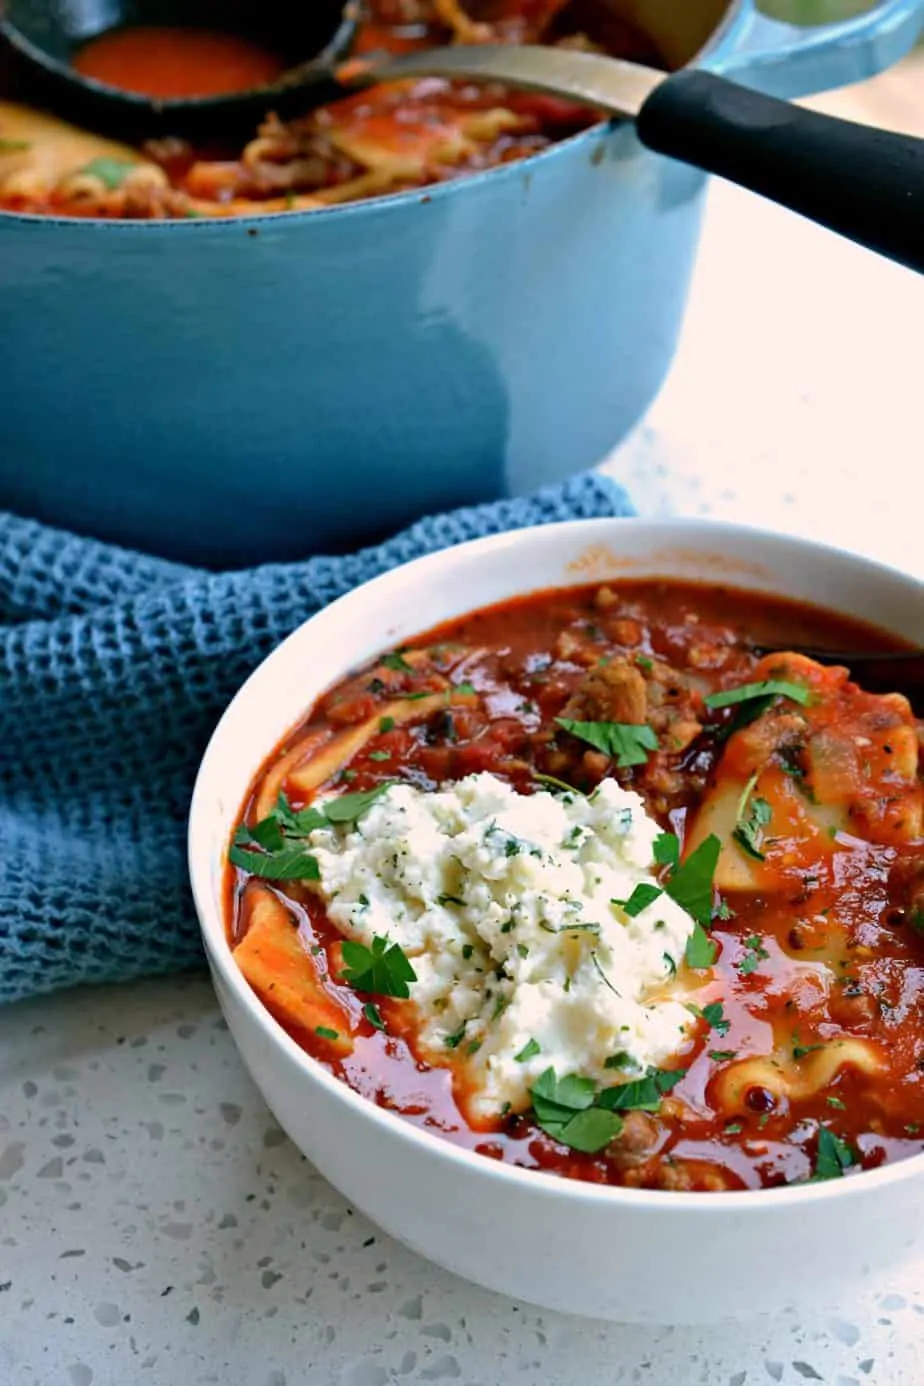 Lasagna Soup brings all the wonderful flavors of a delectable layered Italian lasagna together in a simple soup.